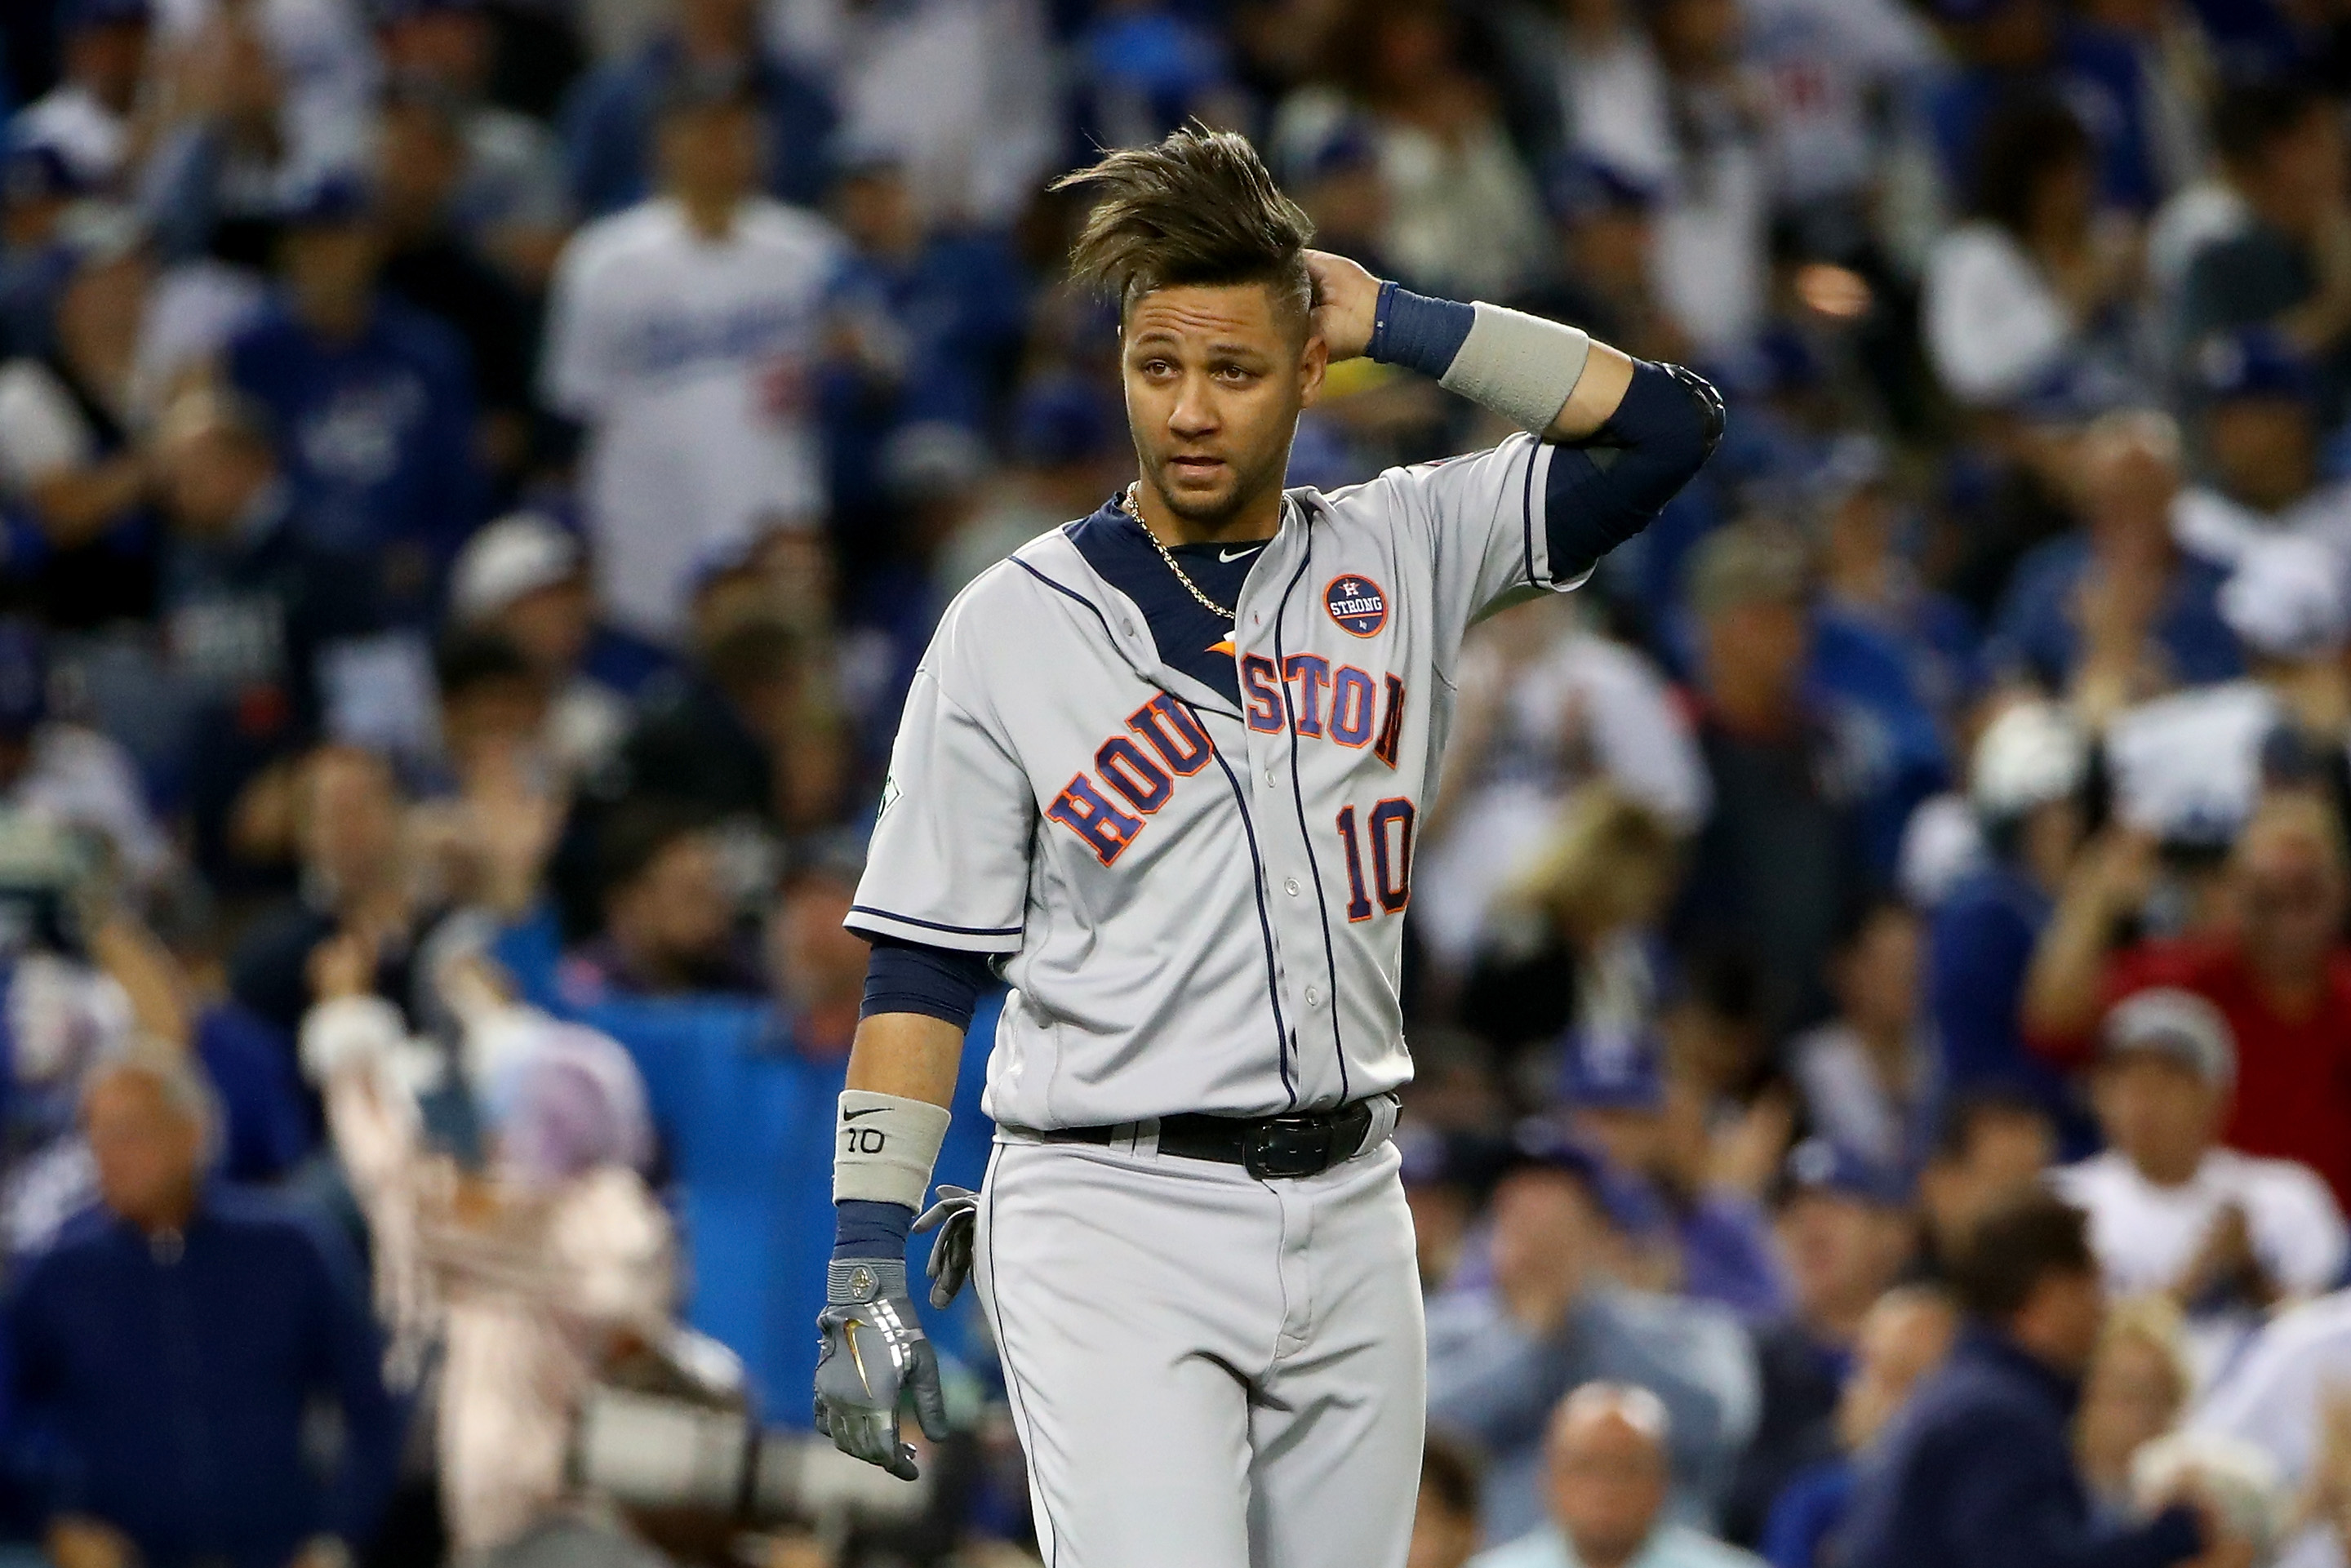 MLB should have suspended Gurriel during series